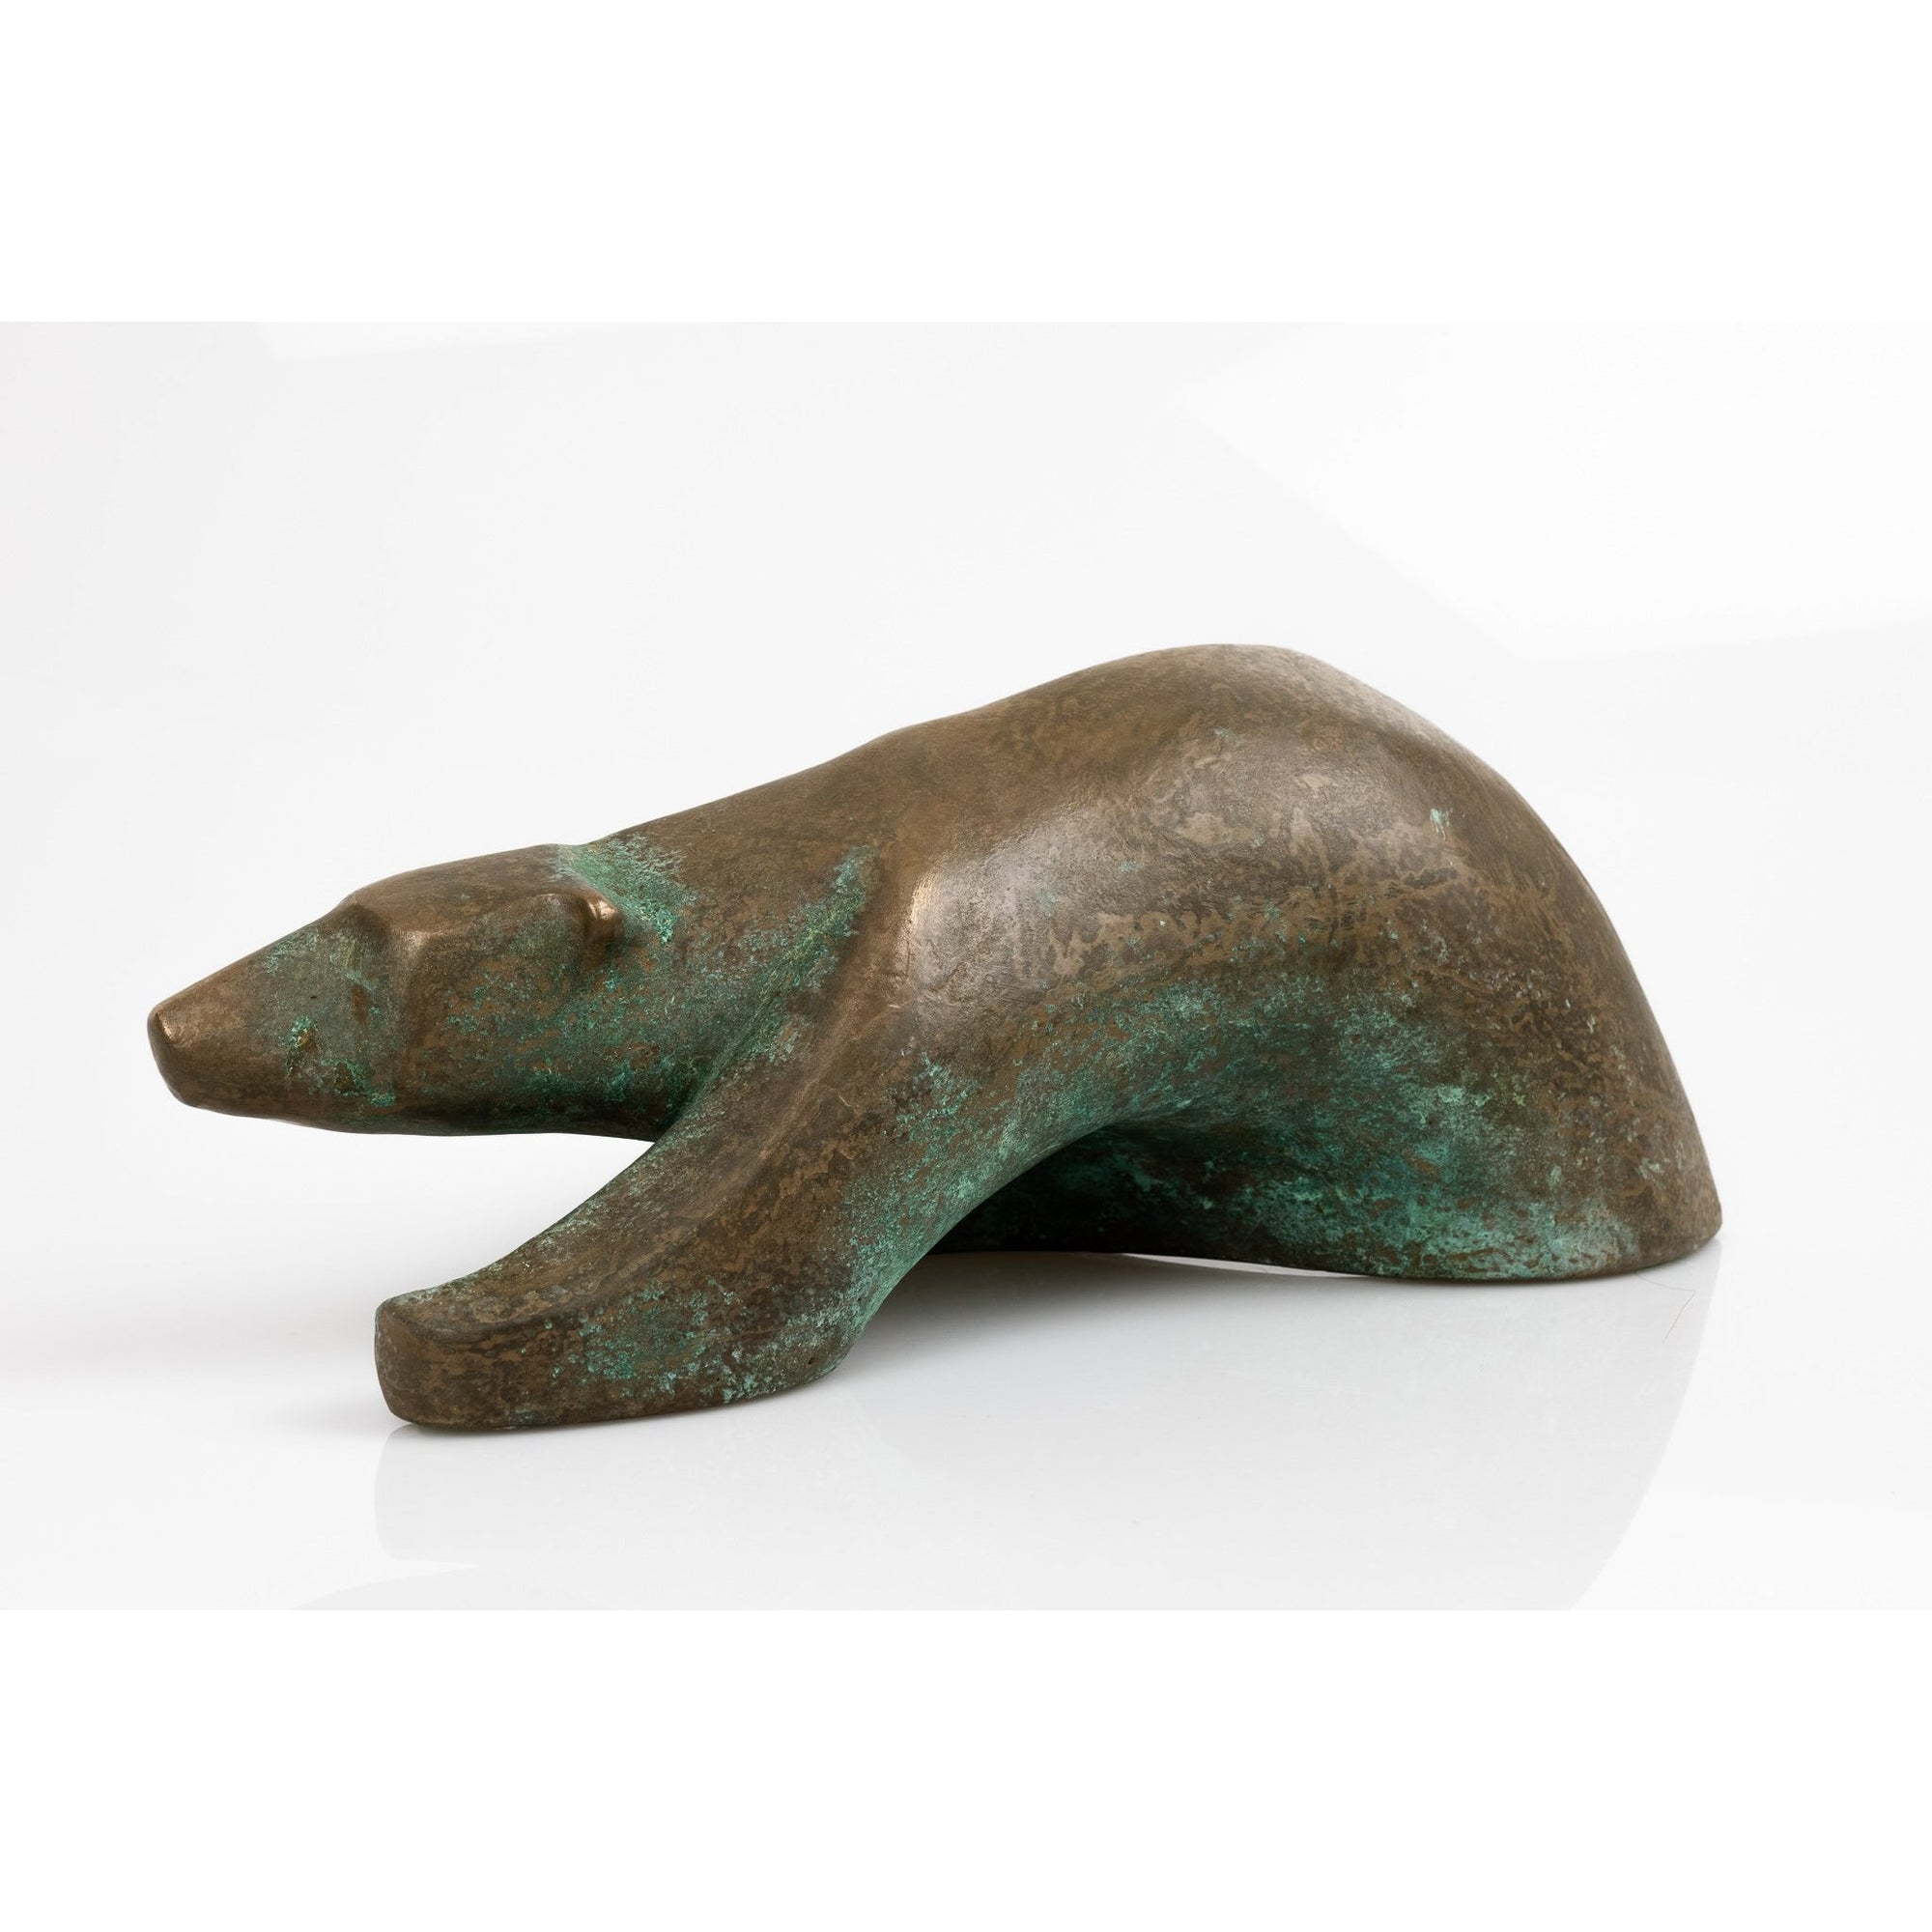 AA18 ‘Polaris', limited edition sculpture by Andrew Allanson, available at Padstow Gallery, Cornwall